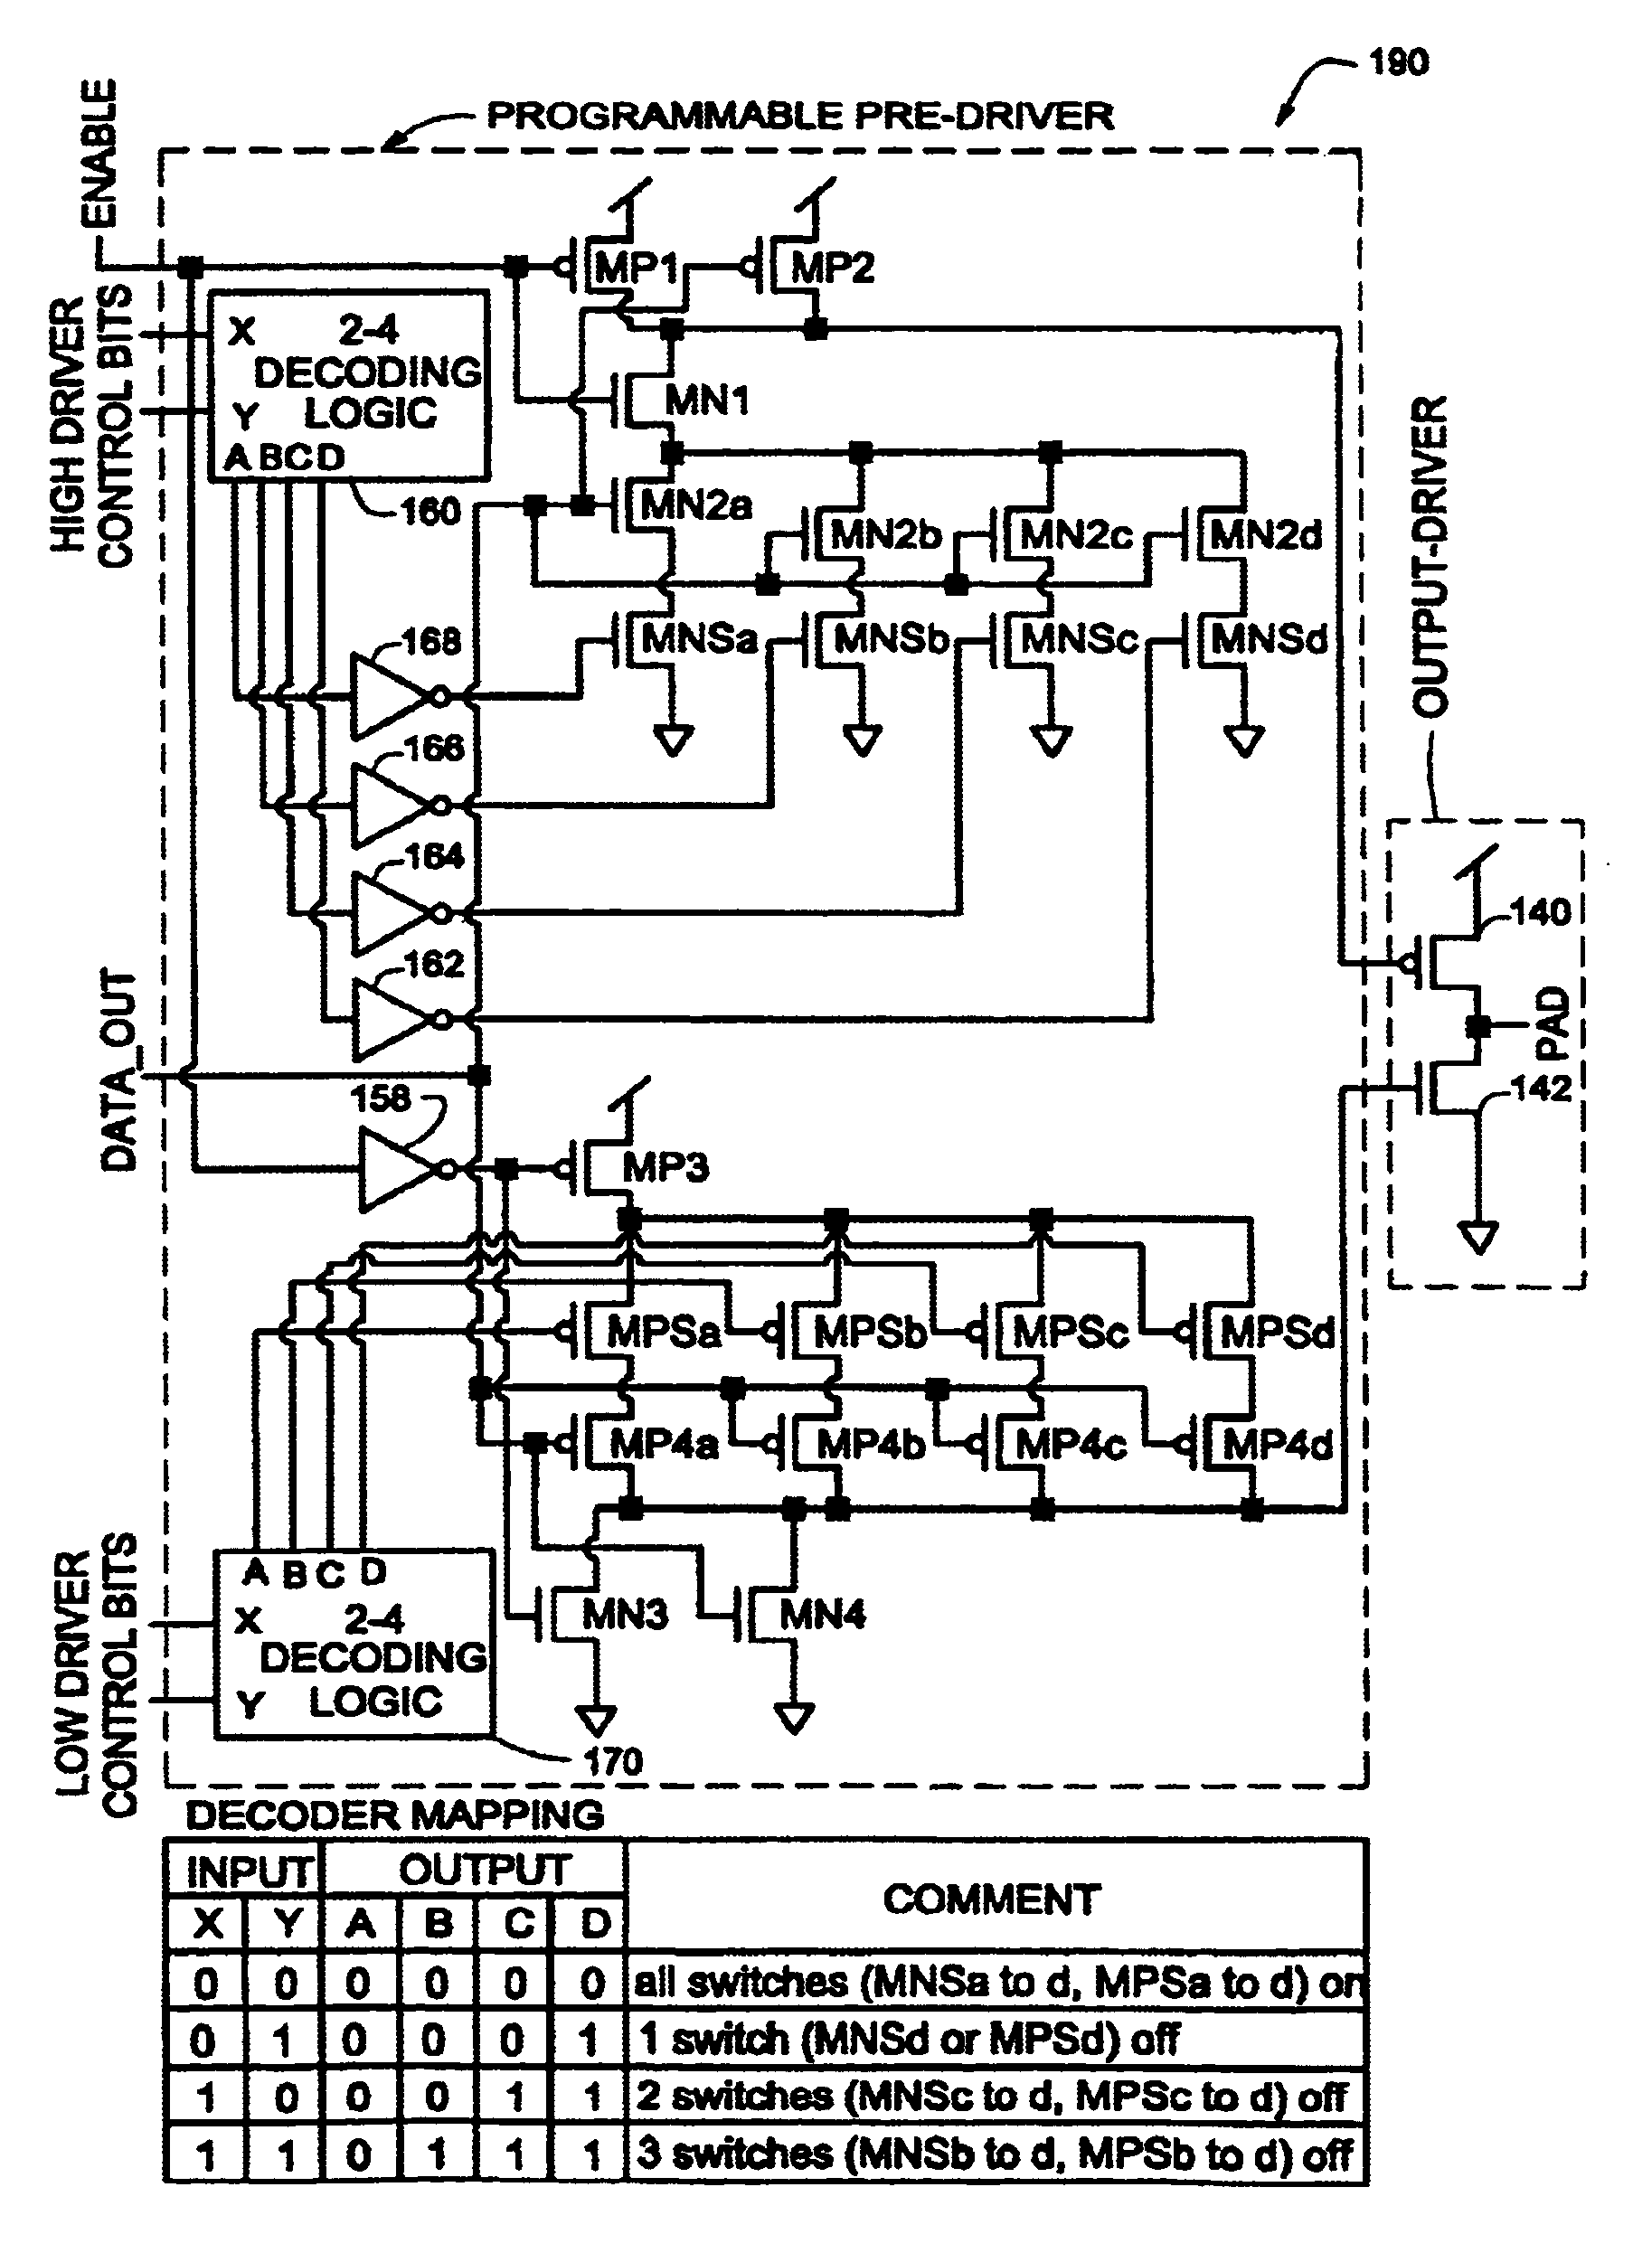 Apparatus and method for a programmable trip point in an I/O circuit using a pre-driver